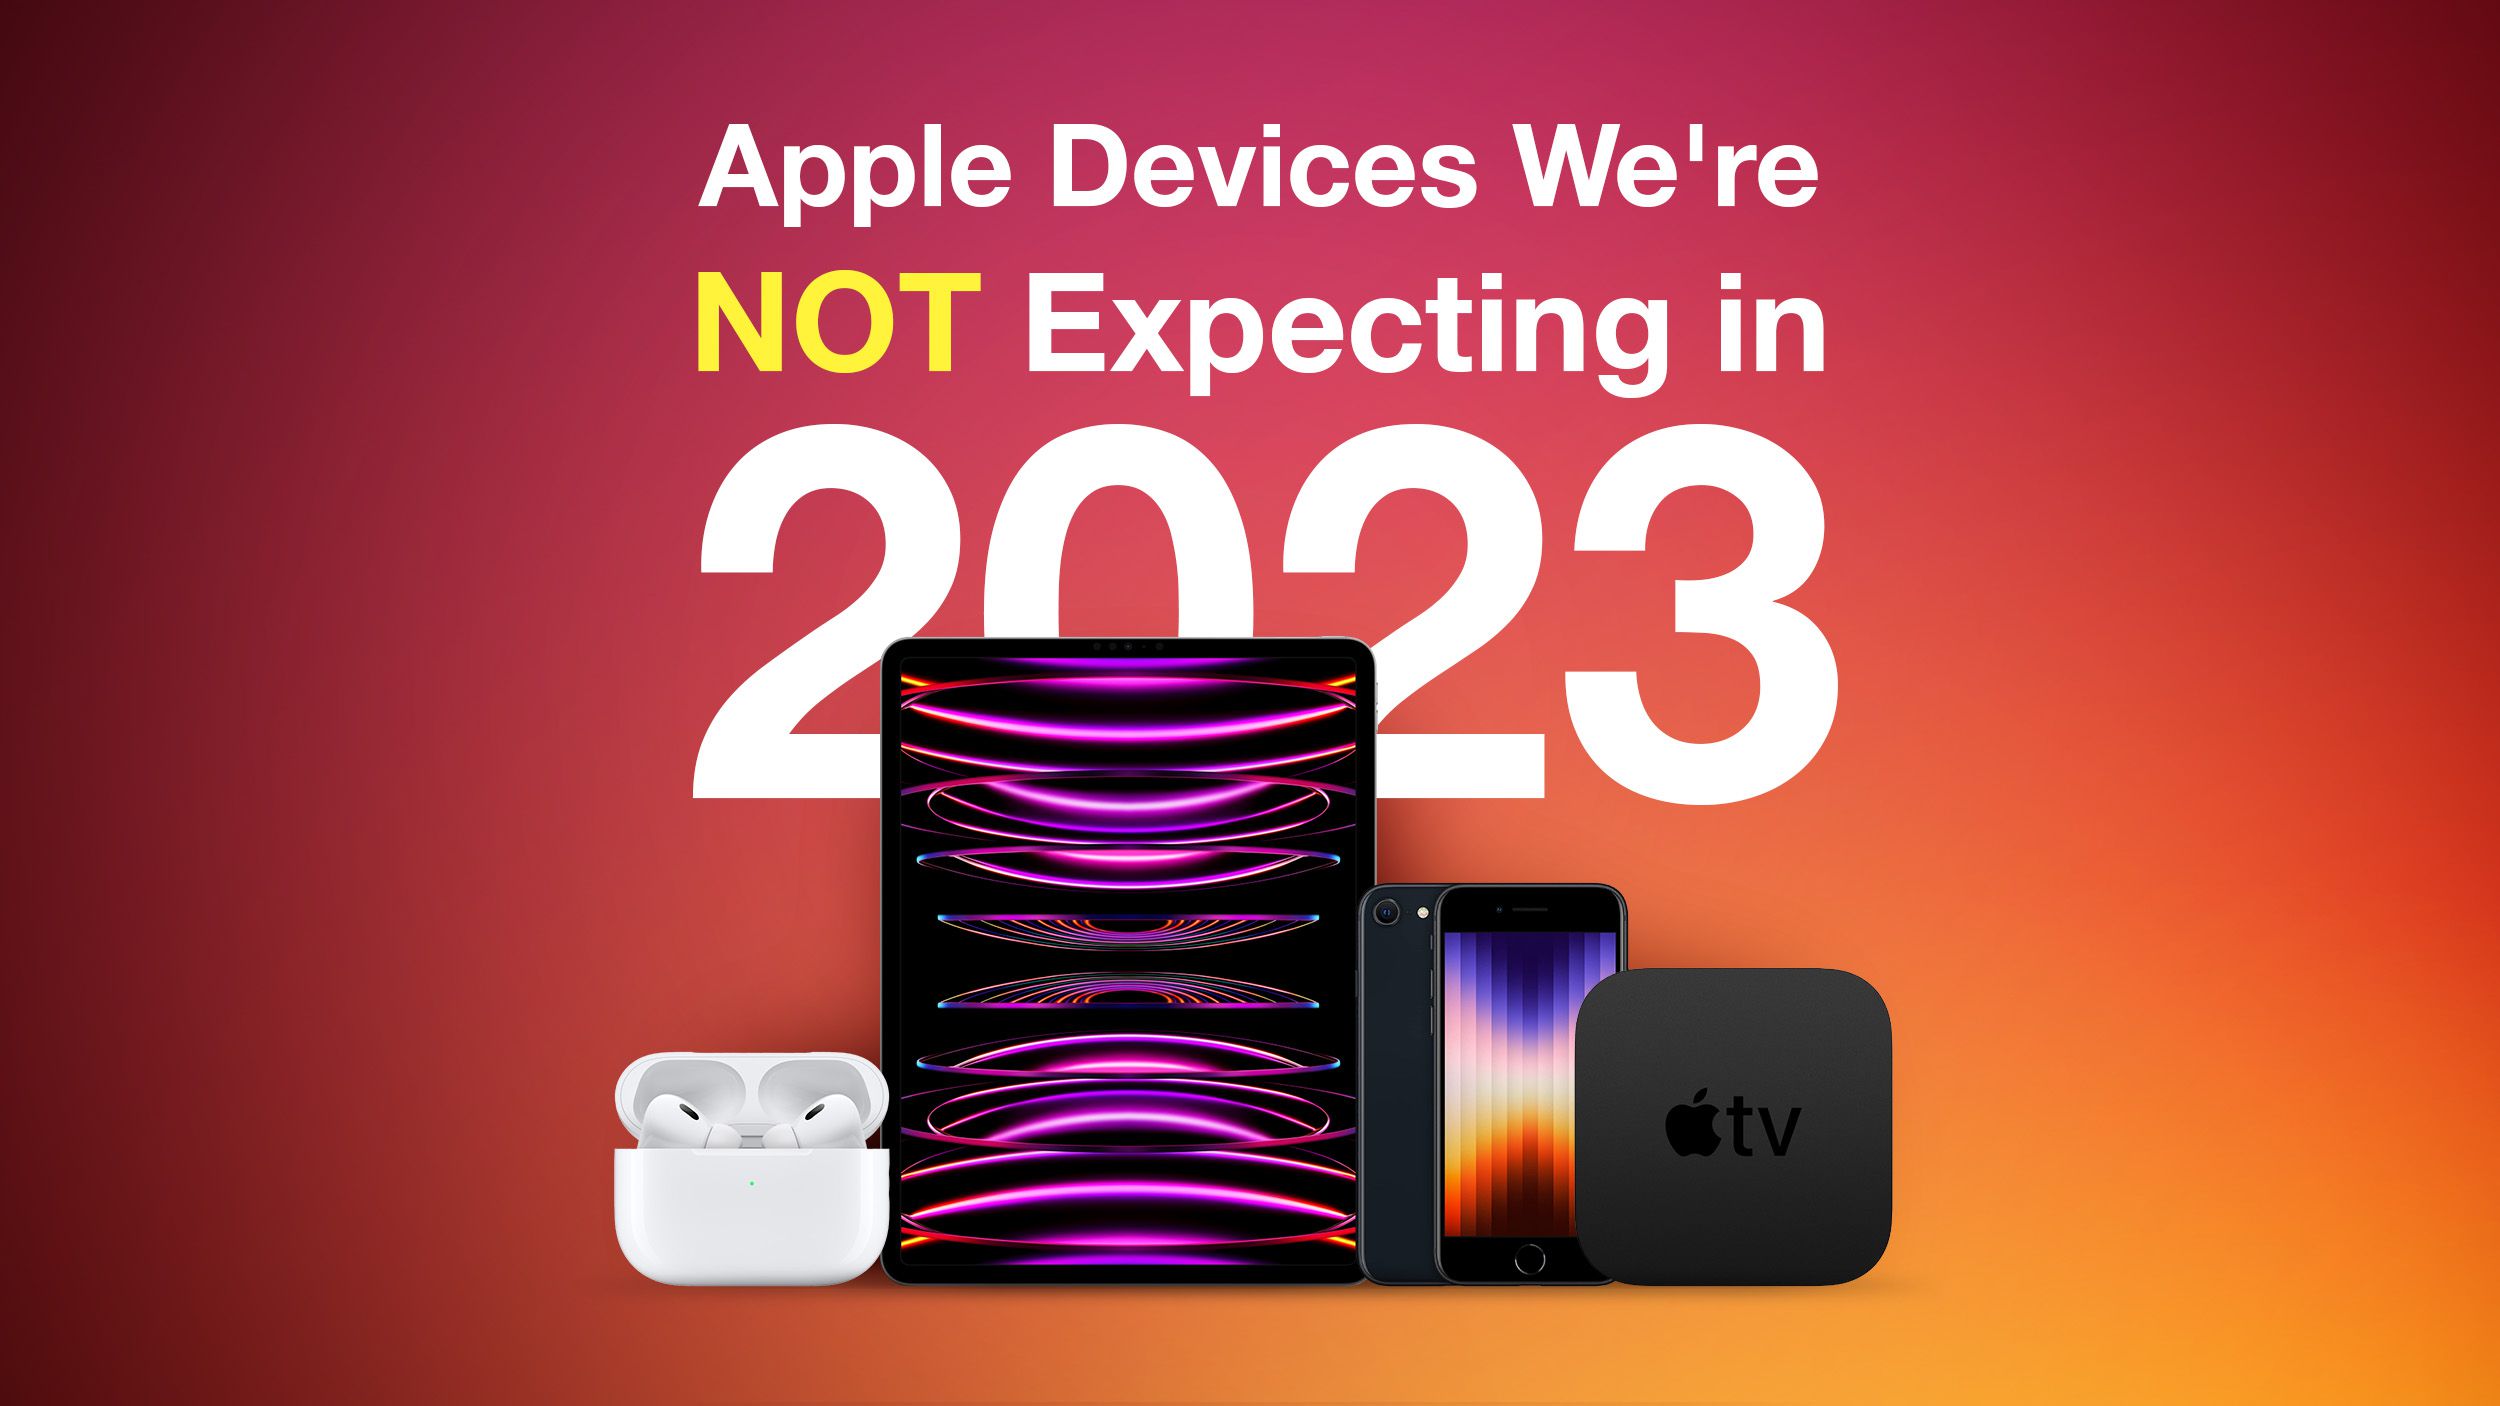 Apple Devices We're NOT Expecting to Launch in 2023